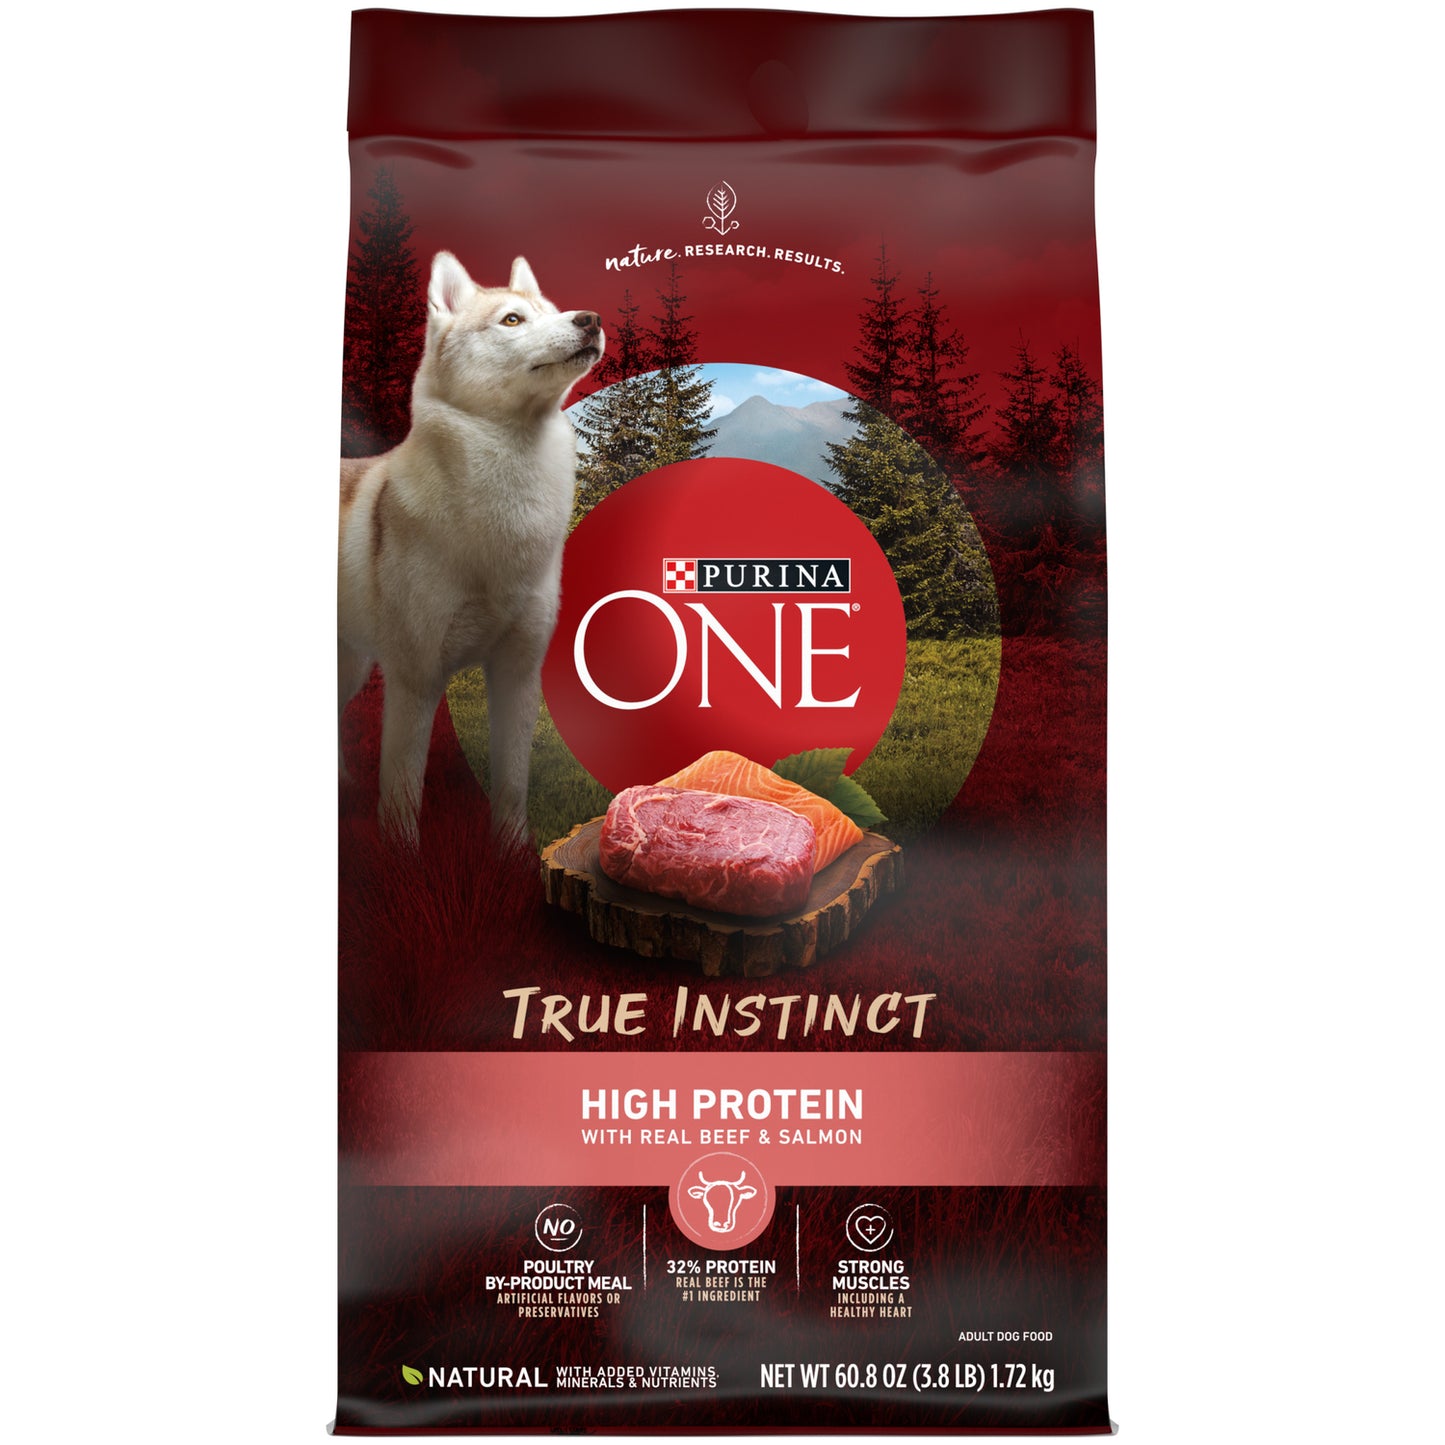 Purina ONE Natural, High Protein Dry Dog Food, True Instinct with Real Beef & Salmon, 3.8 Lb. Bag